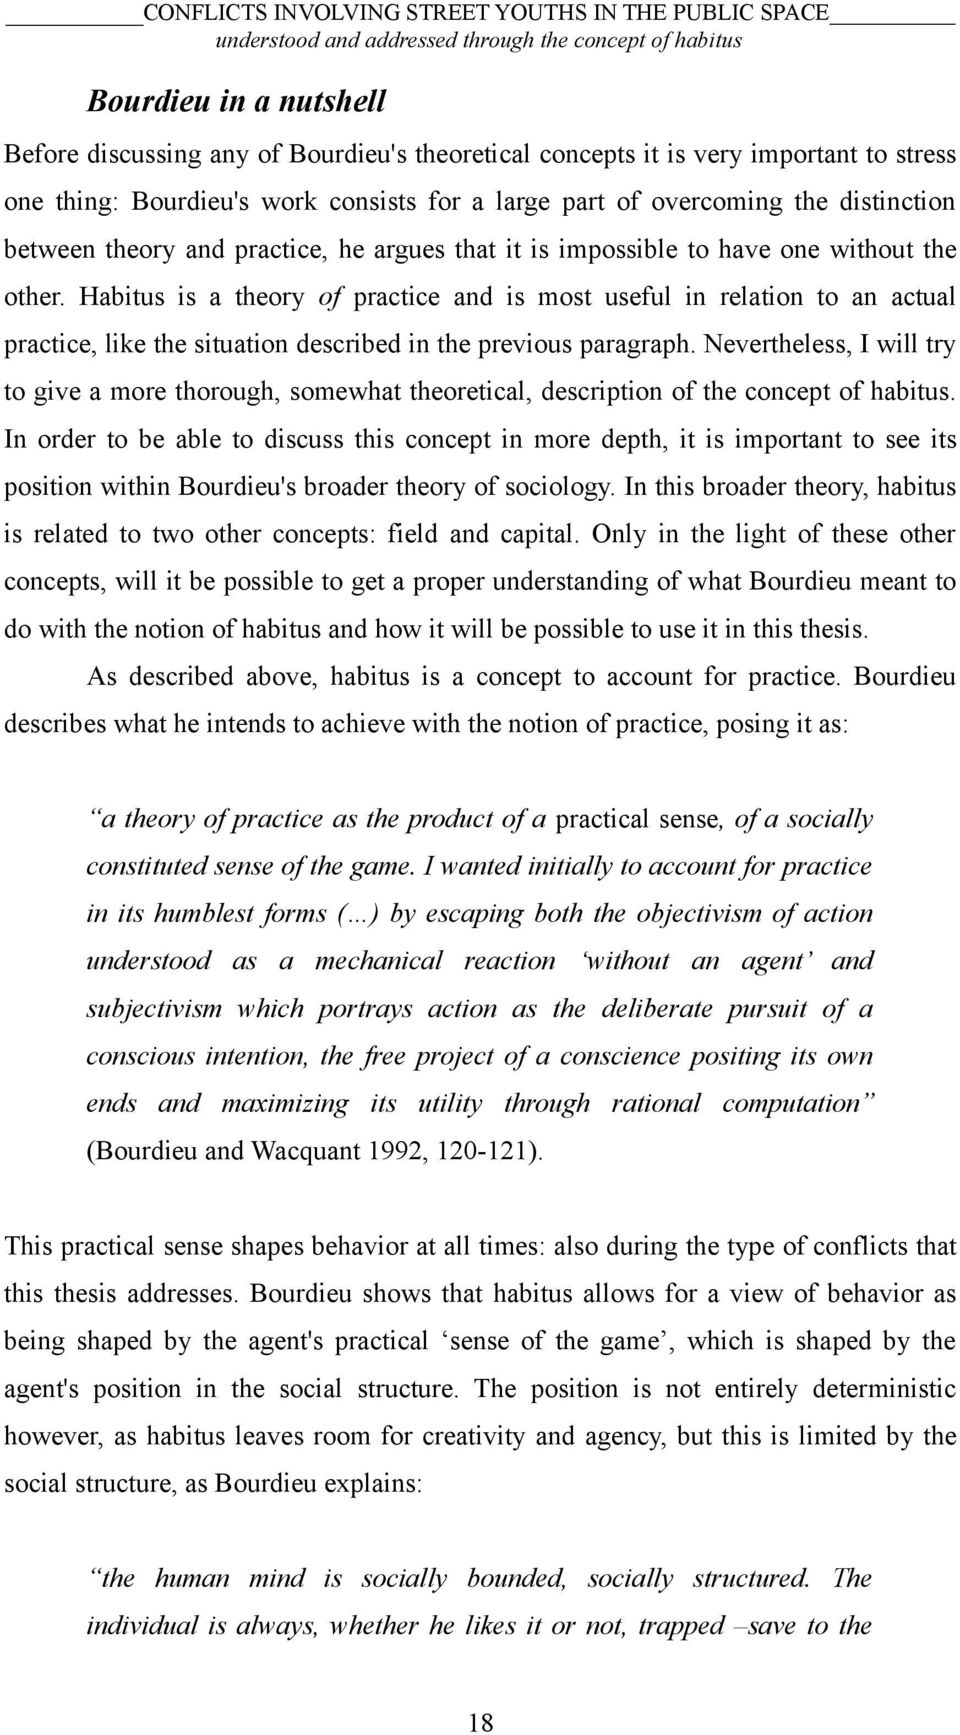 Habitus is a theory of practice and is most useful in relation to an actual practice, like the situation described in the previous paragraph.